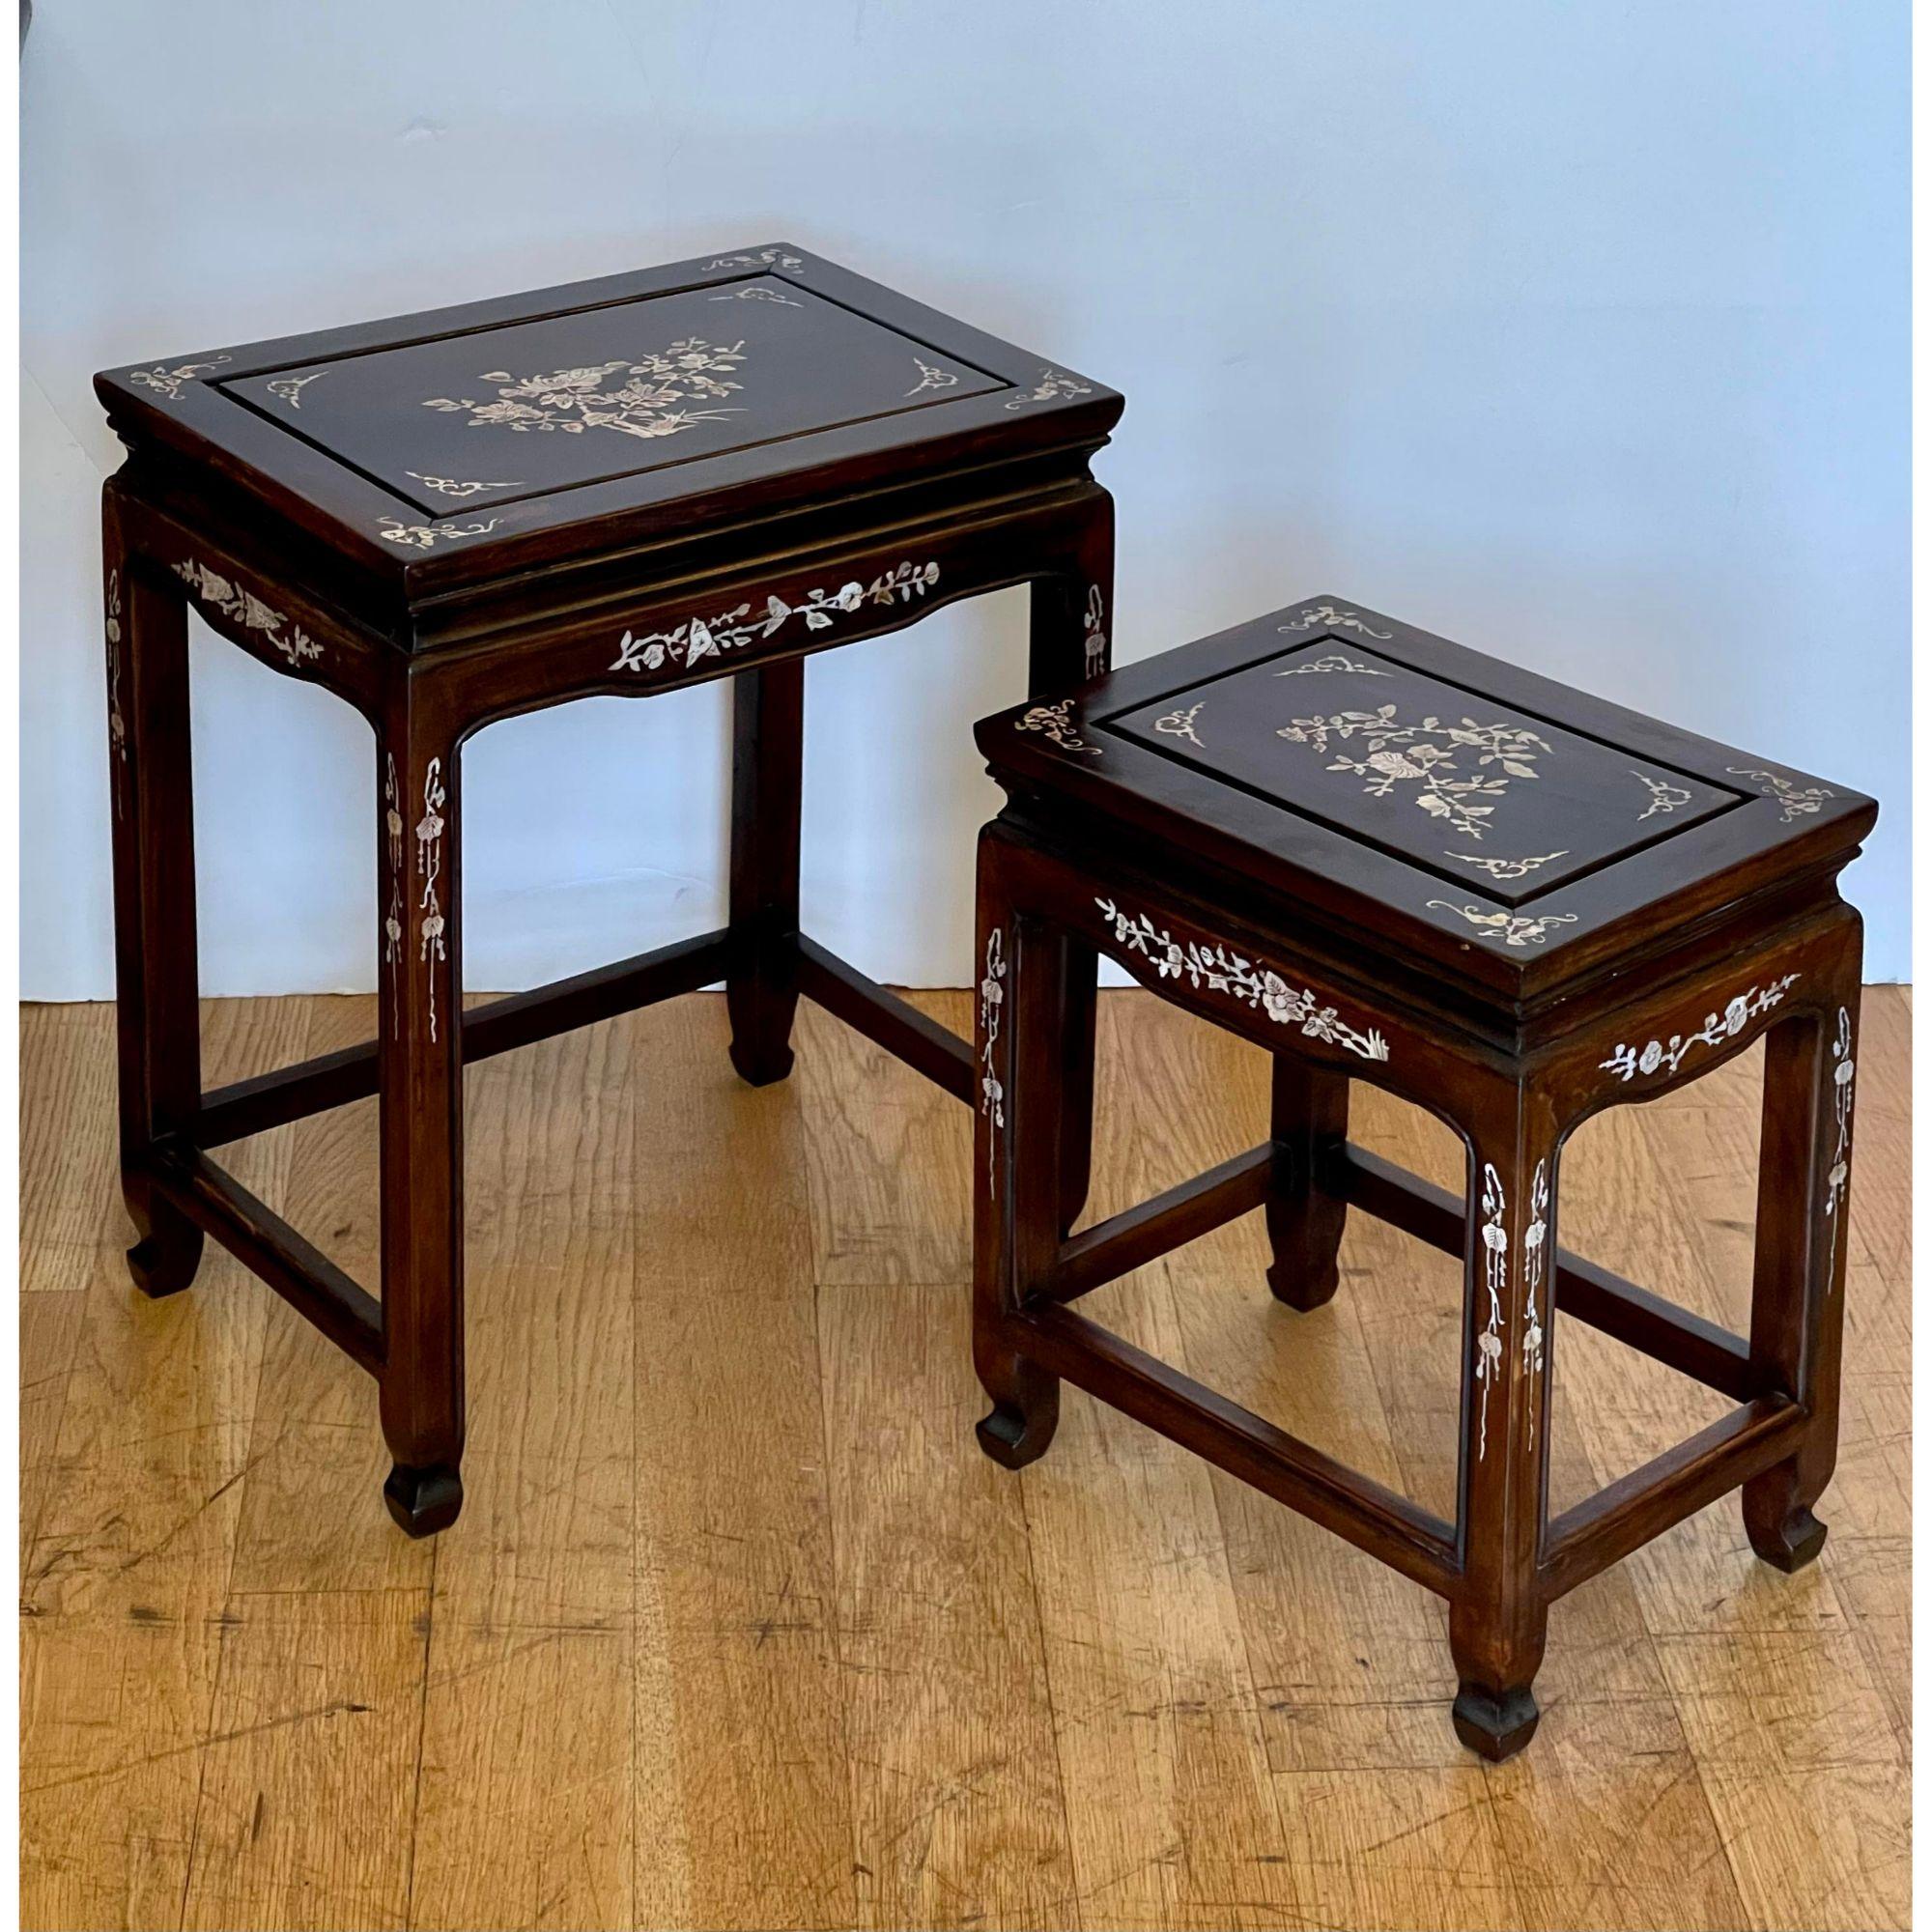 Vintage Japanese Mother Of Pearl Inlaid Rosewood Nesting Tables. This item includes restricted materials and can not be sold outside of the contiguous United States

Additional information: 
Materials: Mother-of-Pearl, Rosewood
Color: